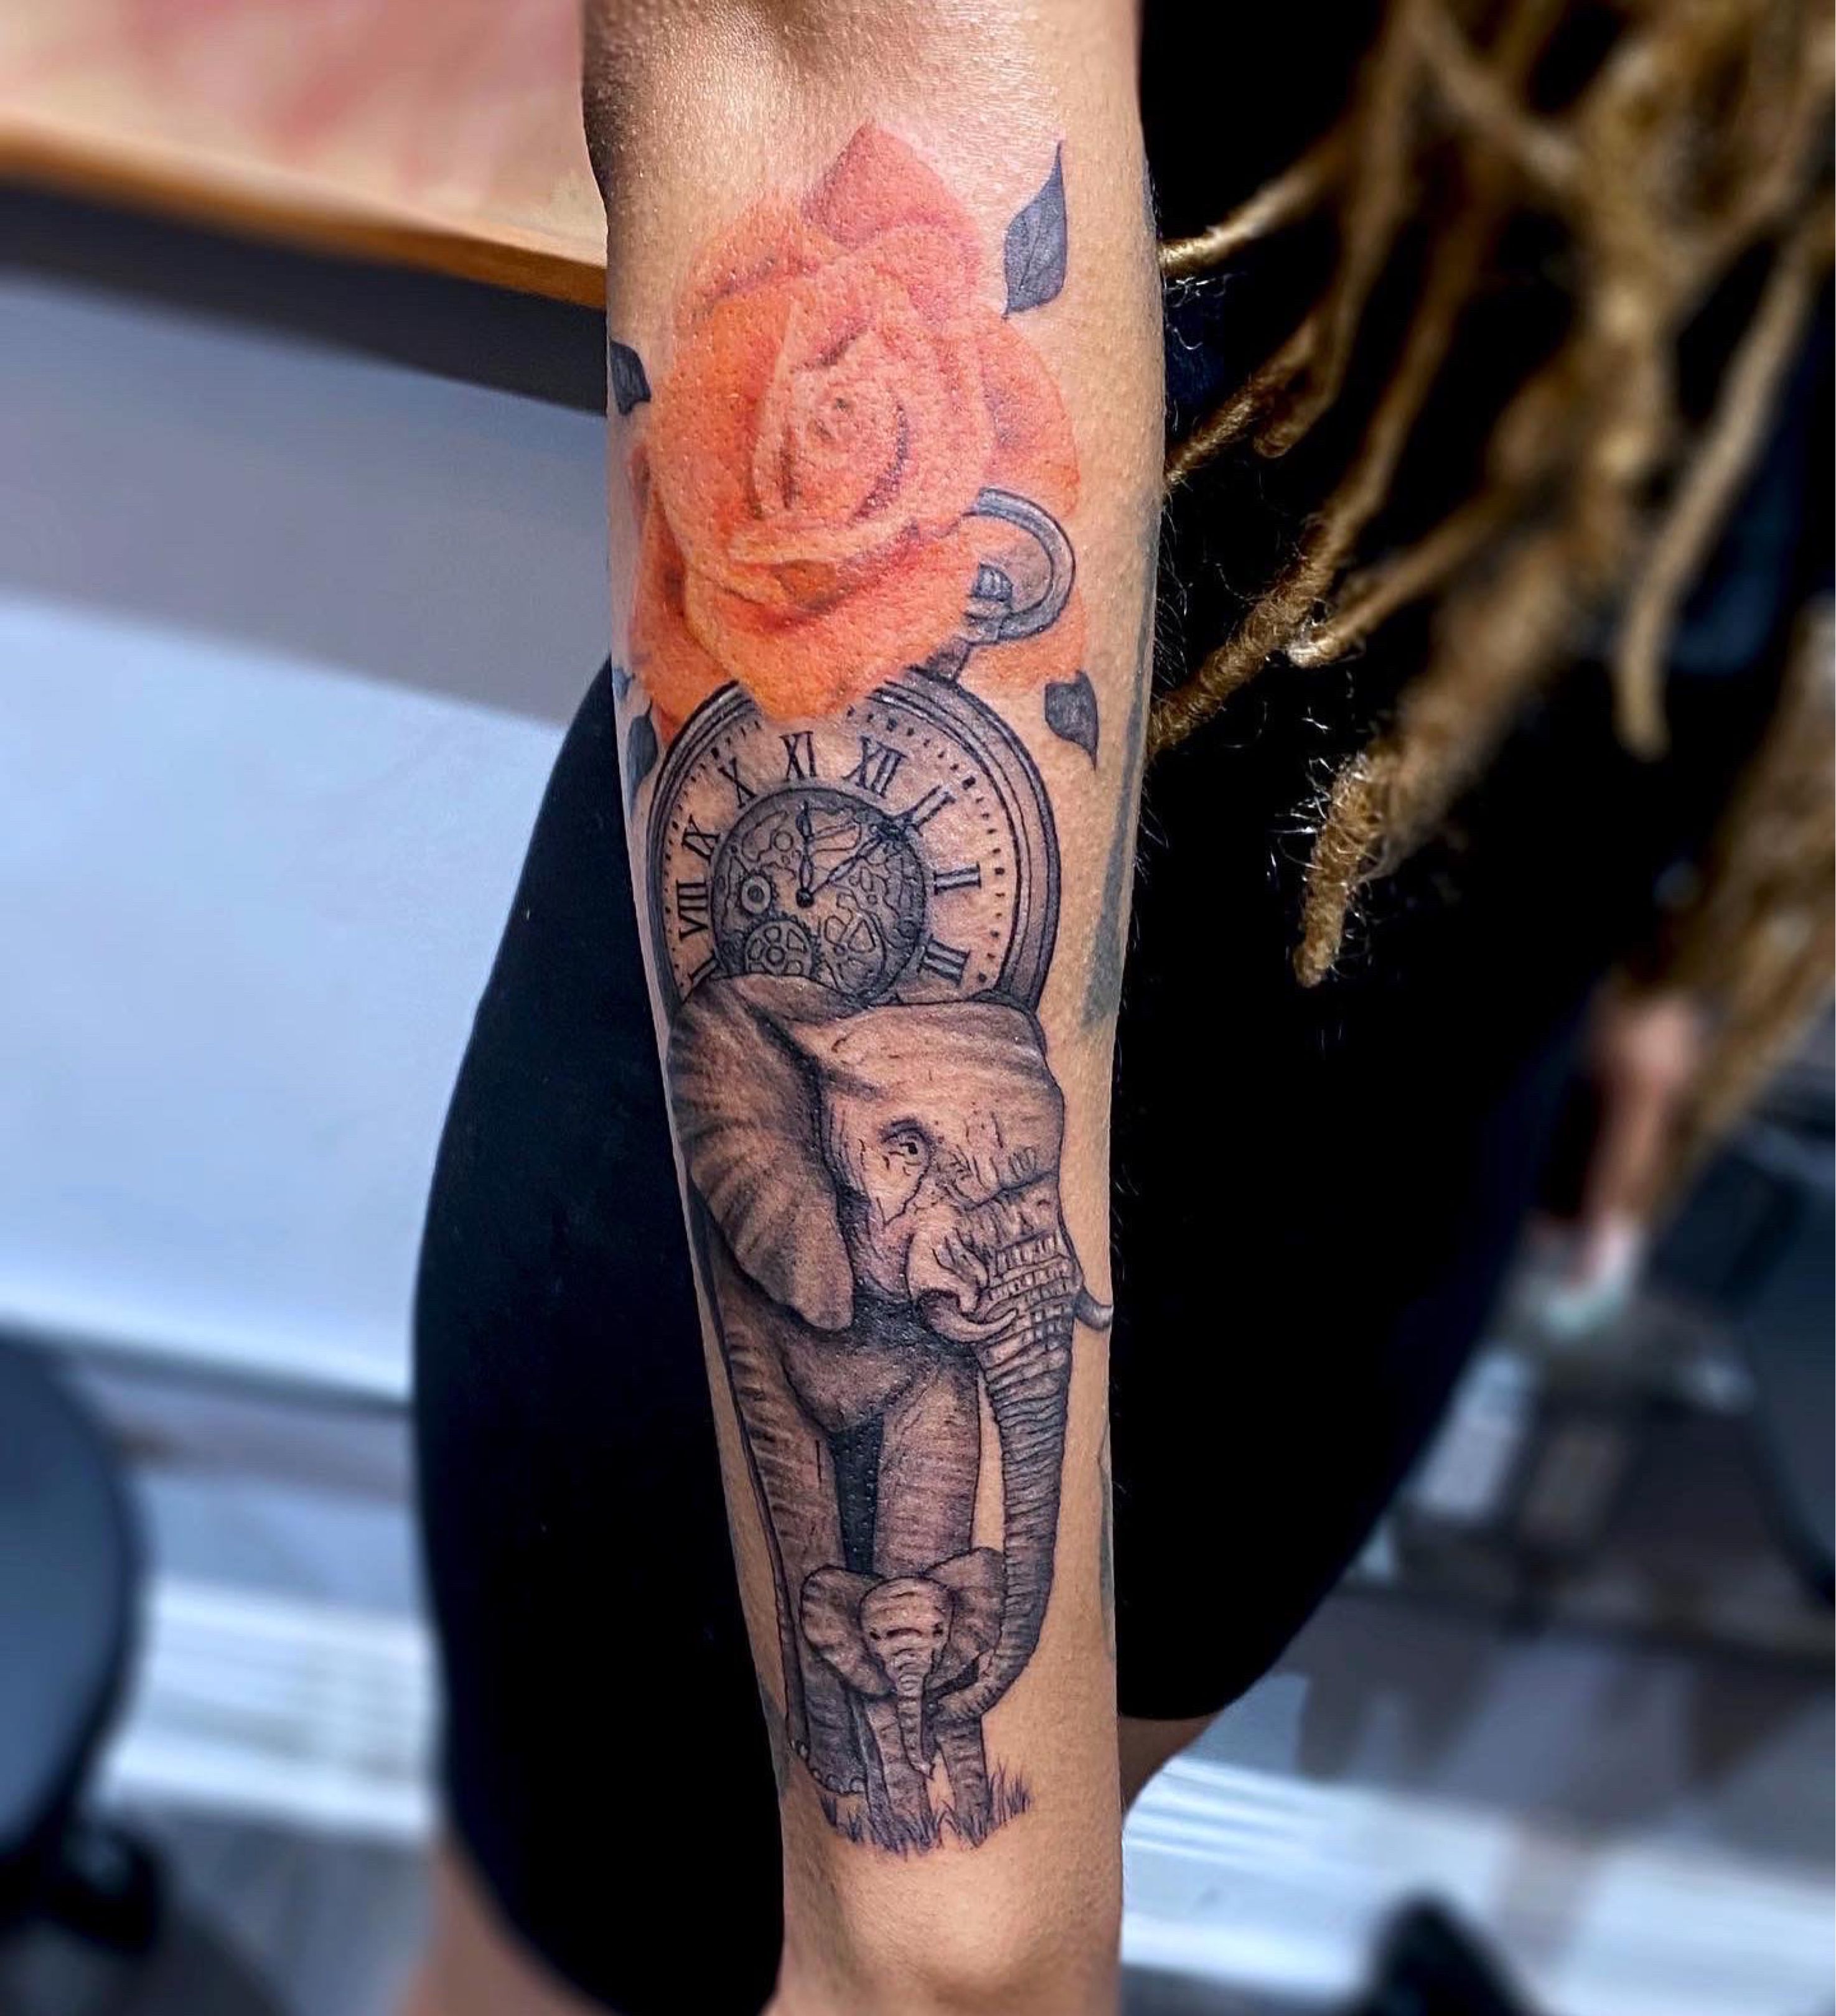 Myhome Tattoos  Cuts by RickyMonroig  Elephant  tattoo with Rose  By  RICKYMONROIG  Facebook